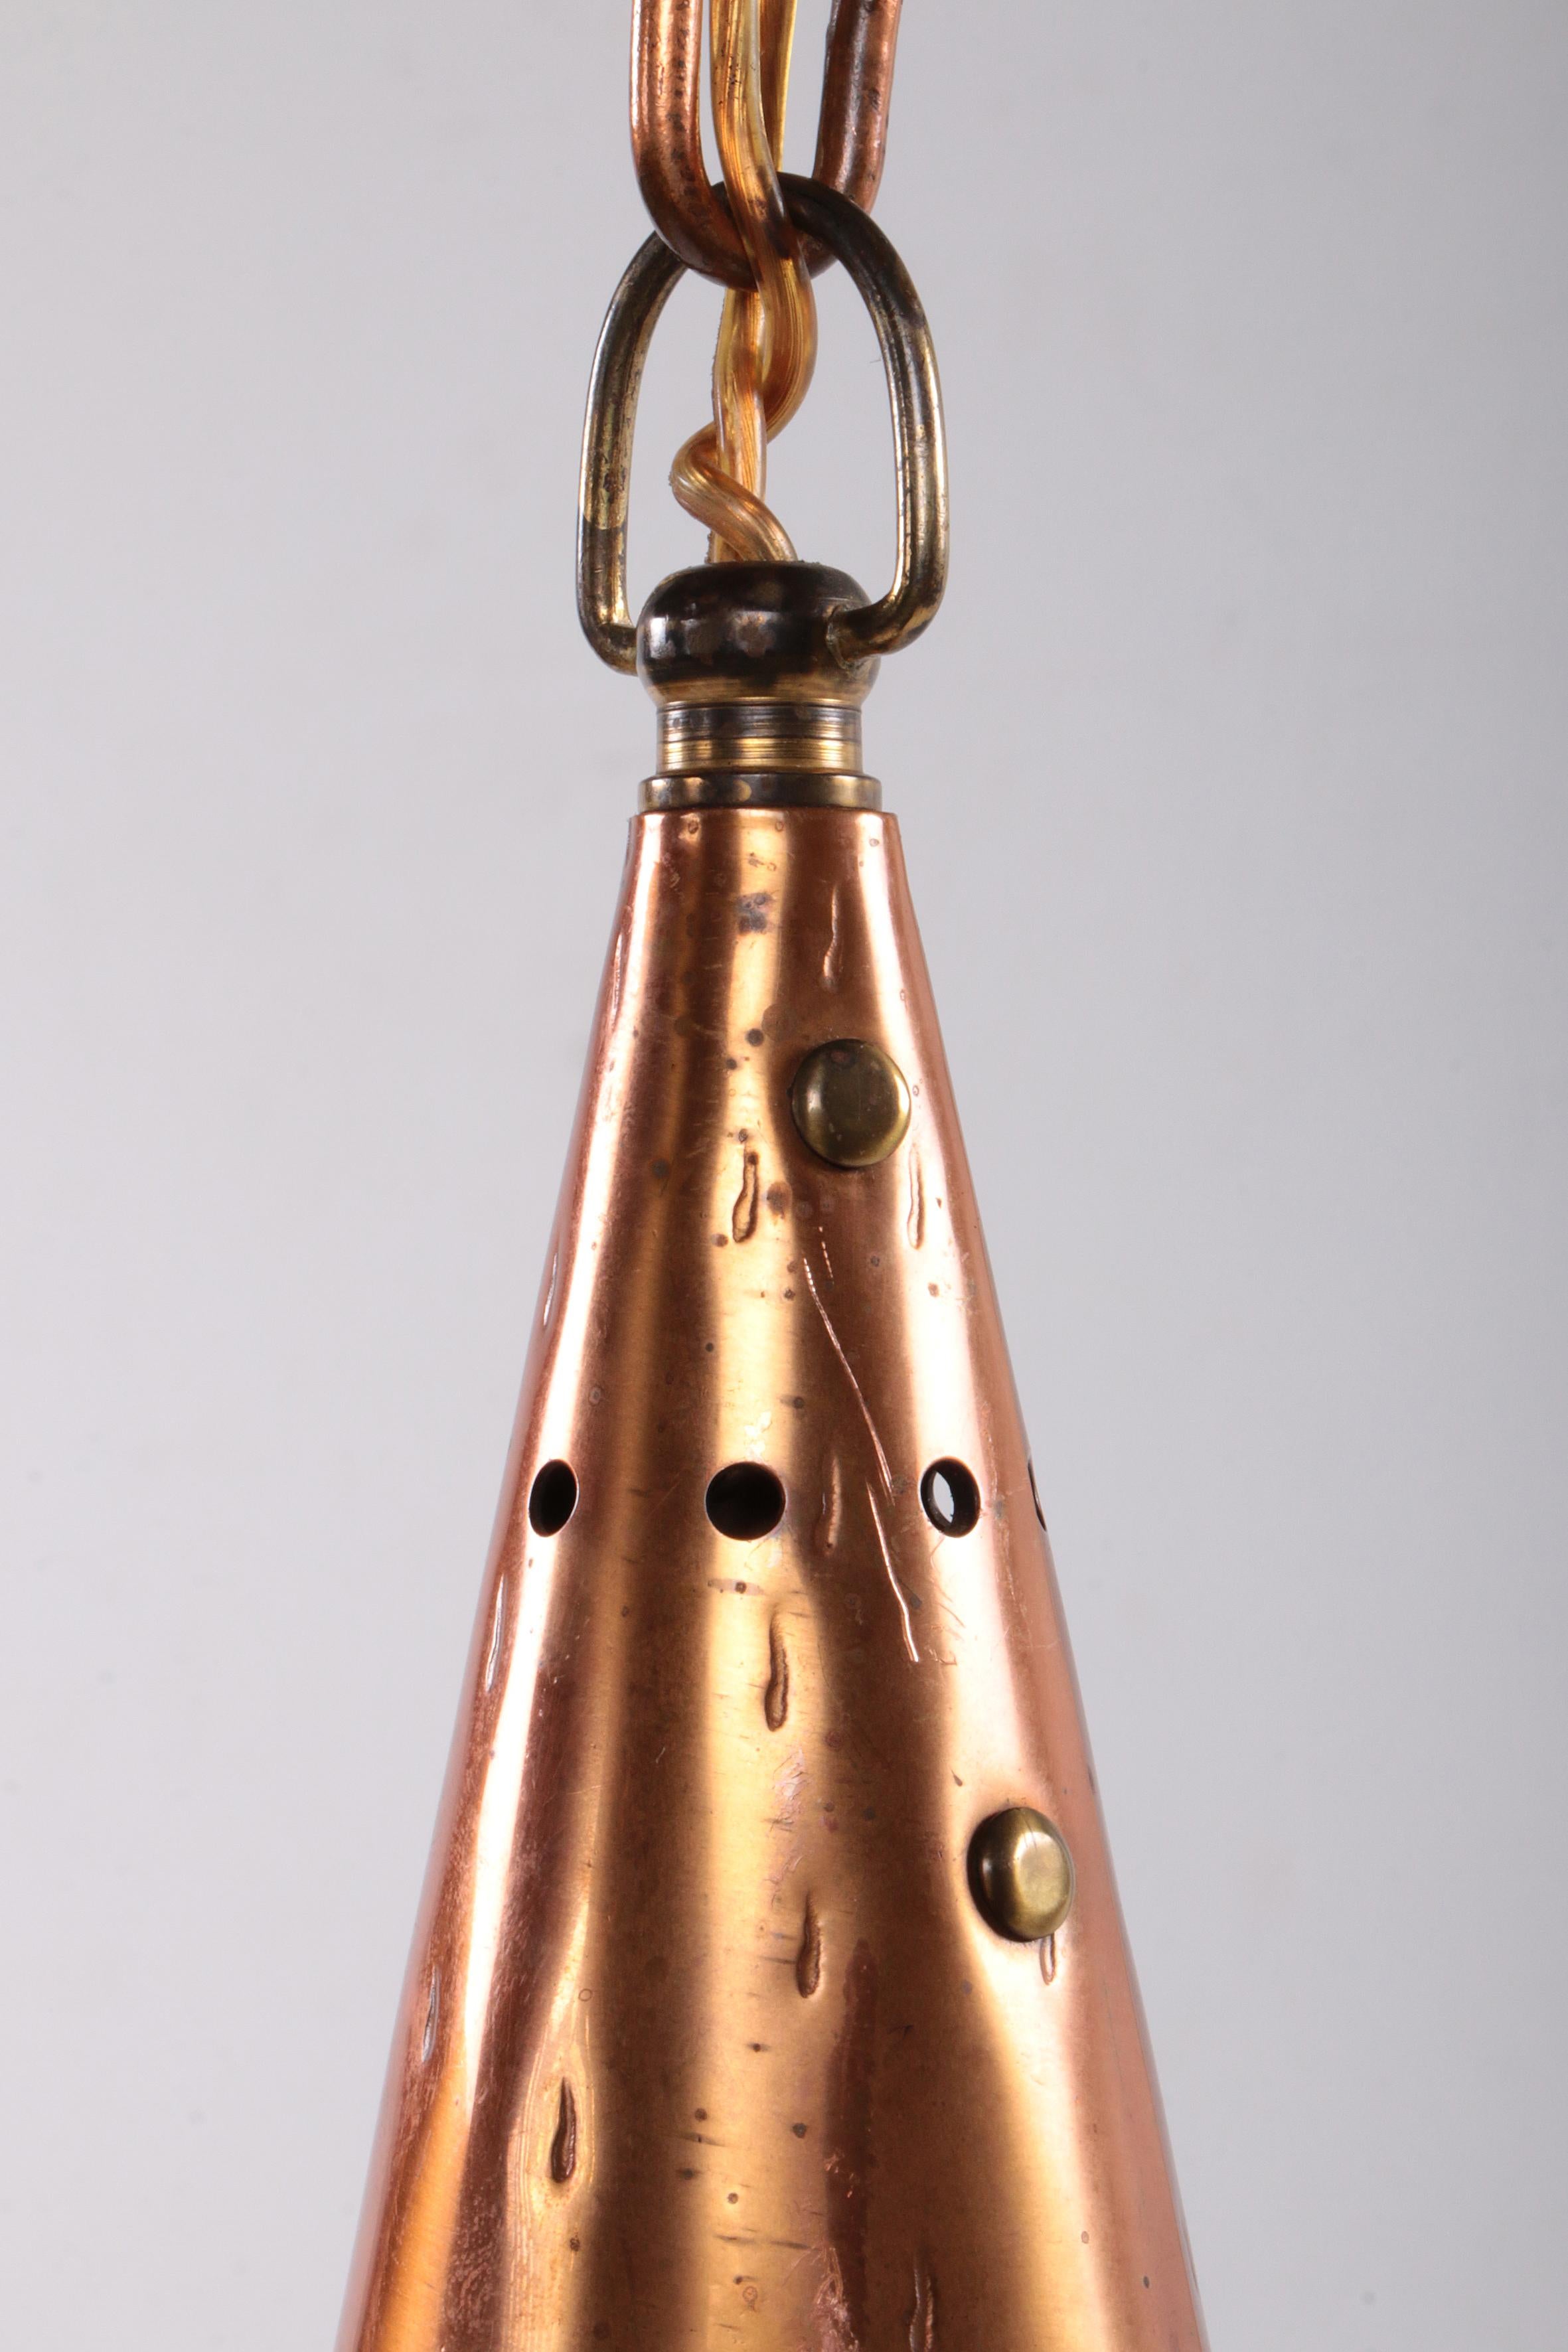 Mid-20th Century Danish hand-hammered copper hanging lamp by E.S Horn Aalestrup, 1950s For Sale